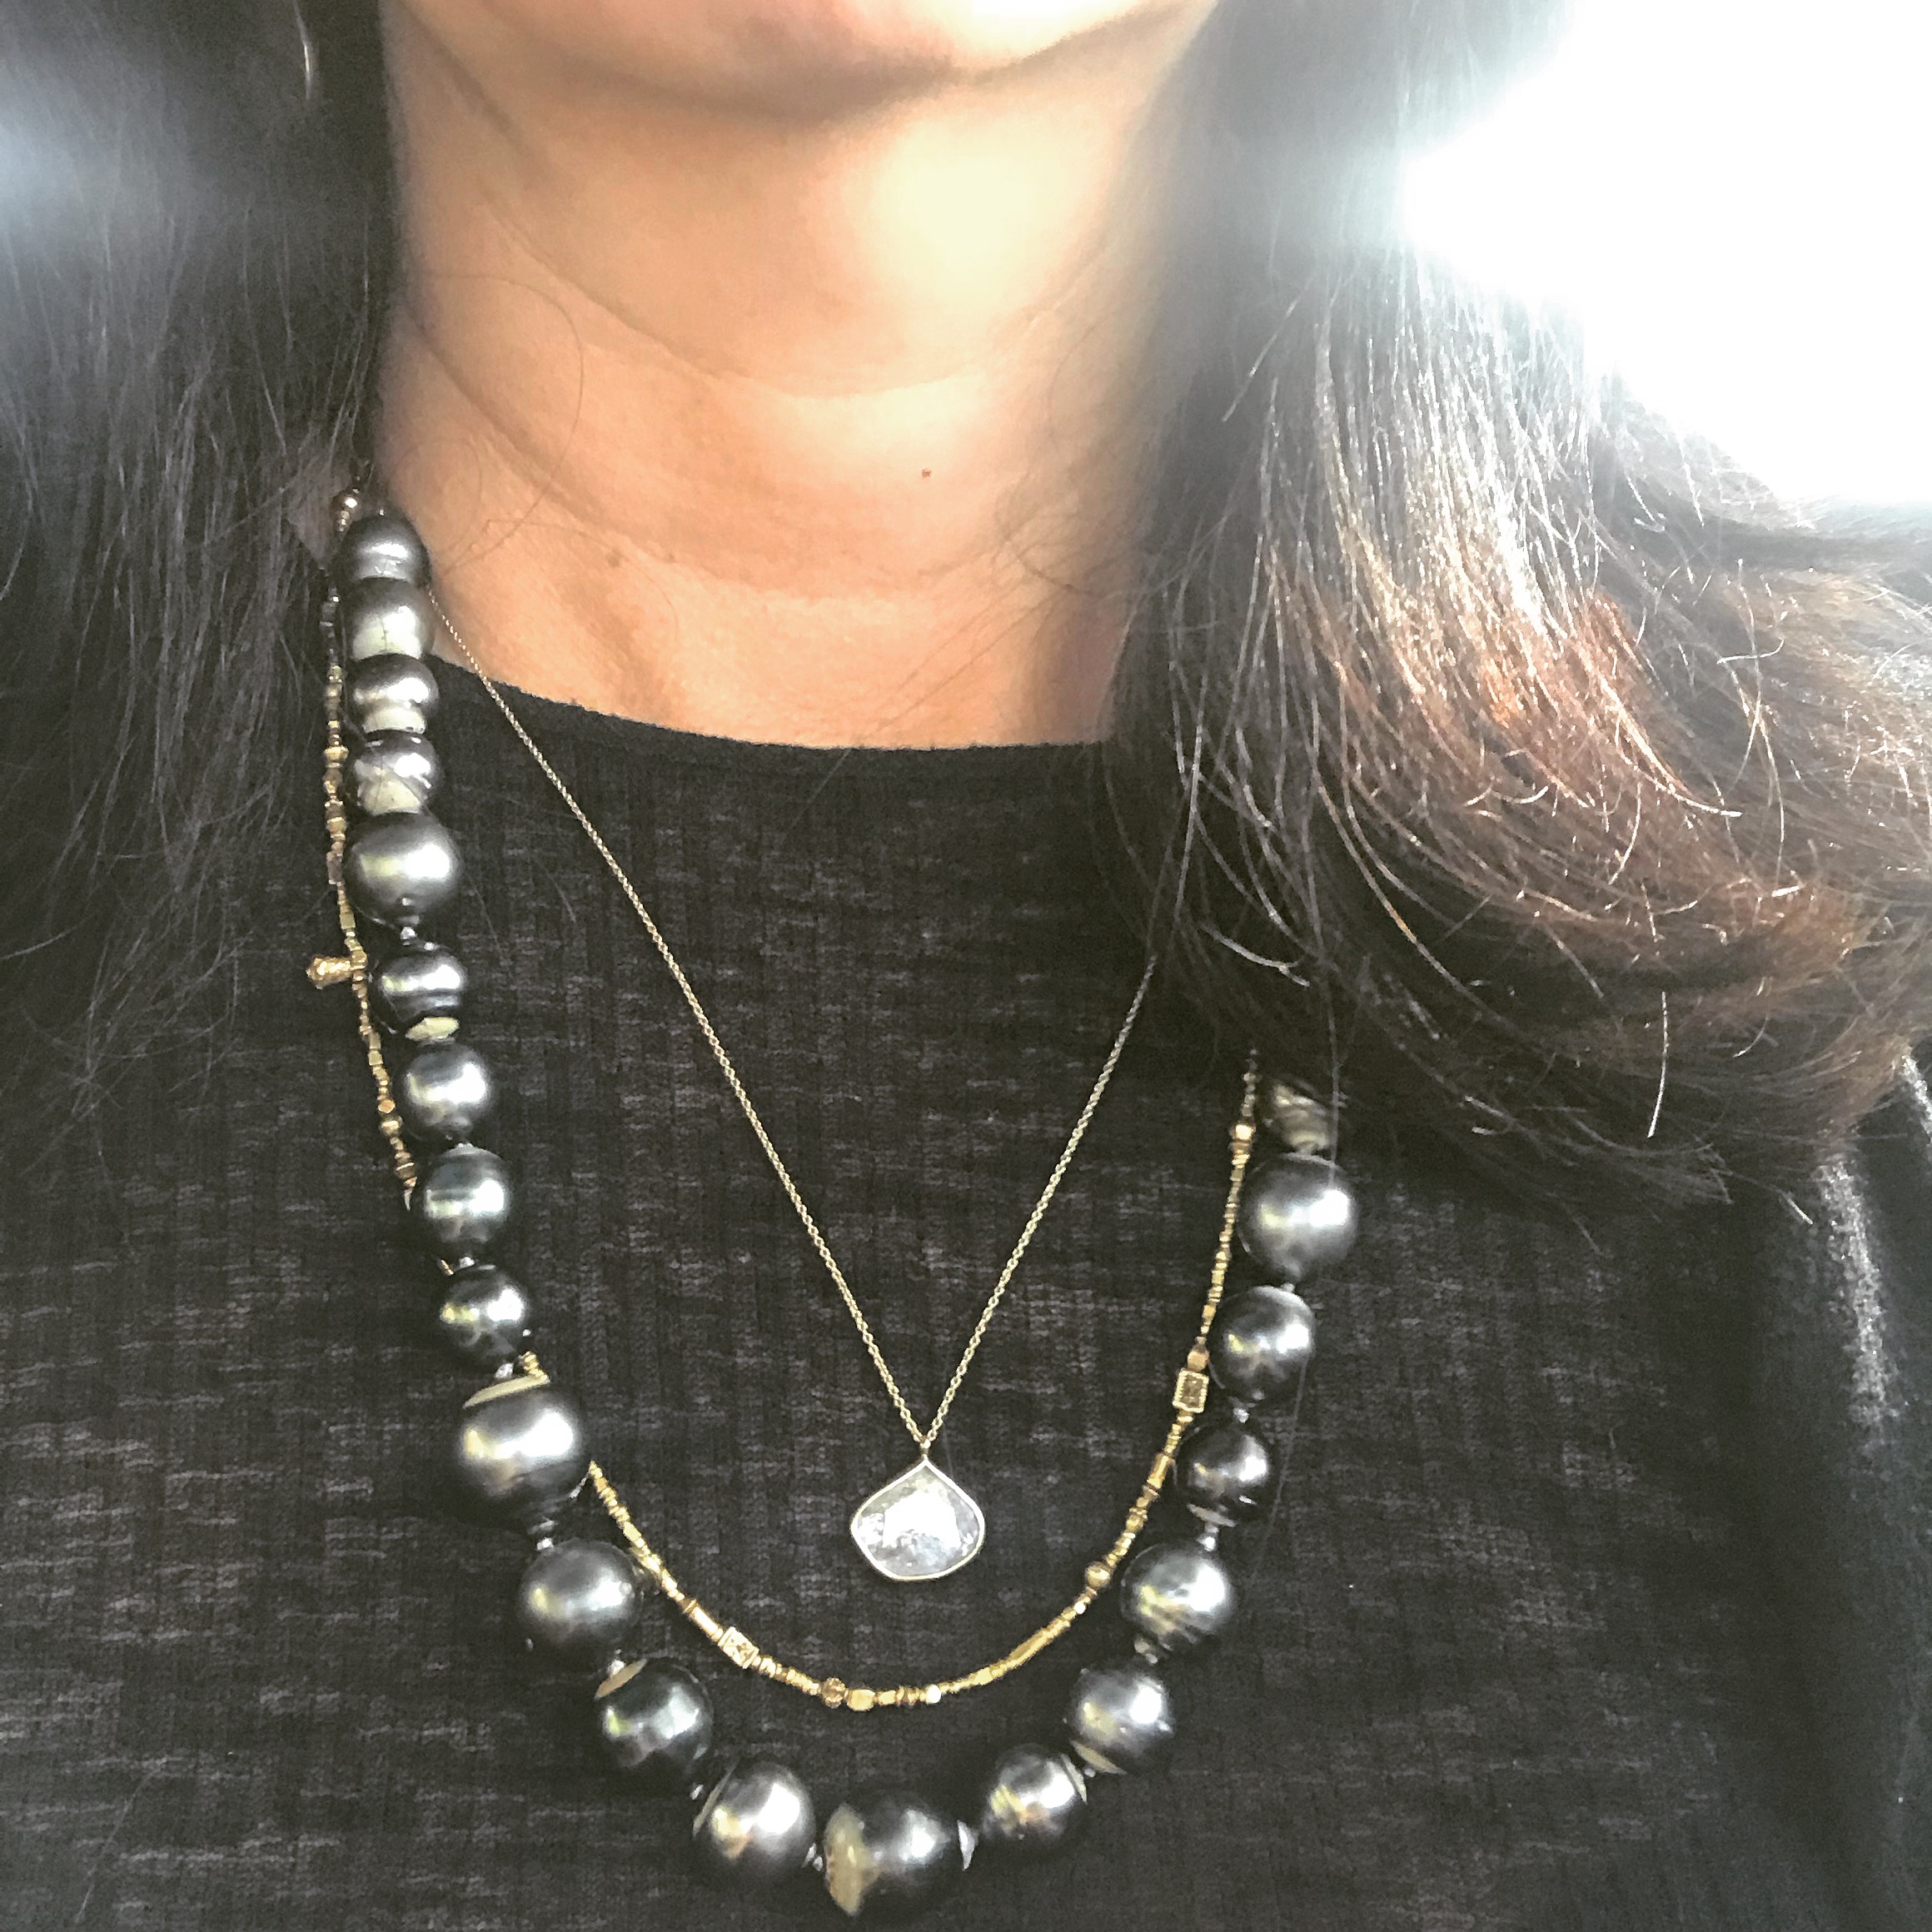 Tahitian Pearl Necklace with Brushed Silver Chain